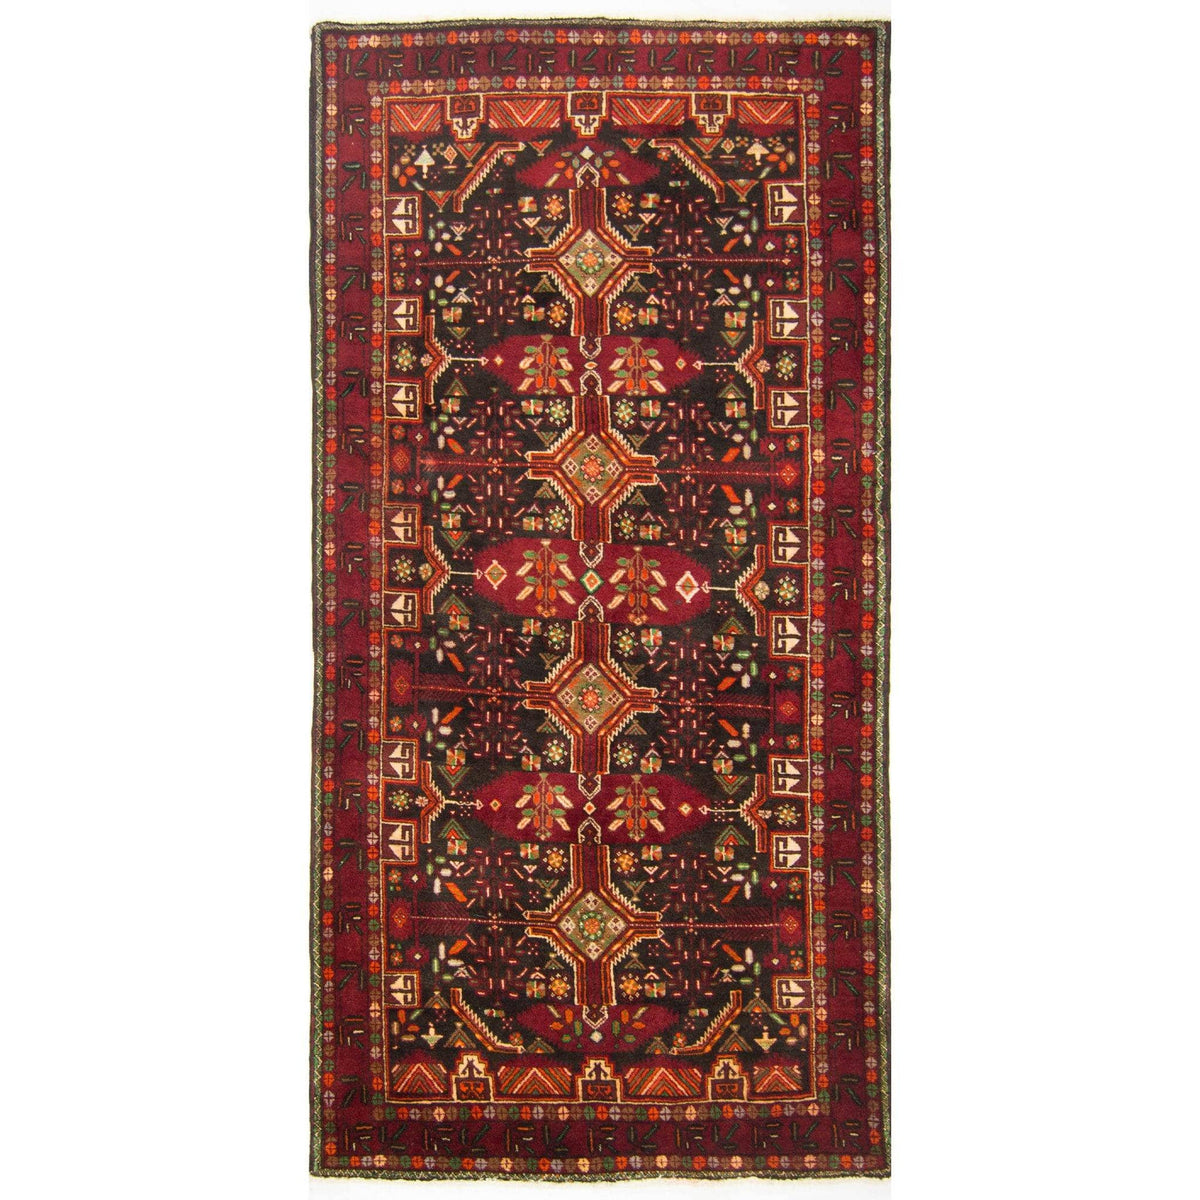 Fine Hand-knotted Persian Wool Baluchi Rug 100cm x 195cm